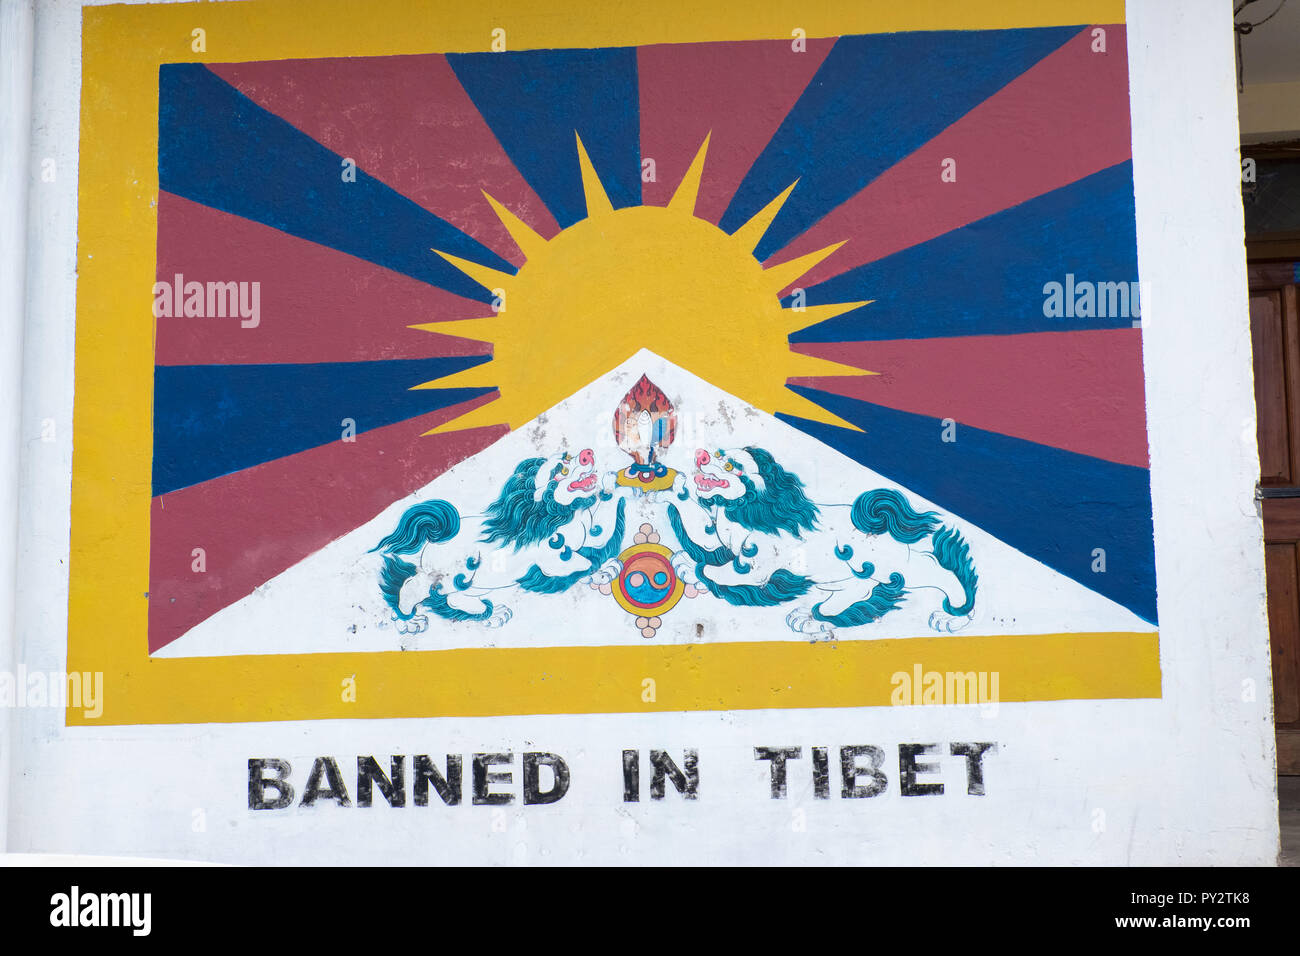 Tibetan flag painted on wall with slogan 'banned in Tibet', Dharamshala, India Stock Photo